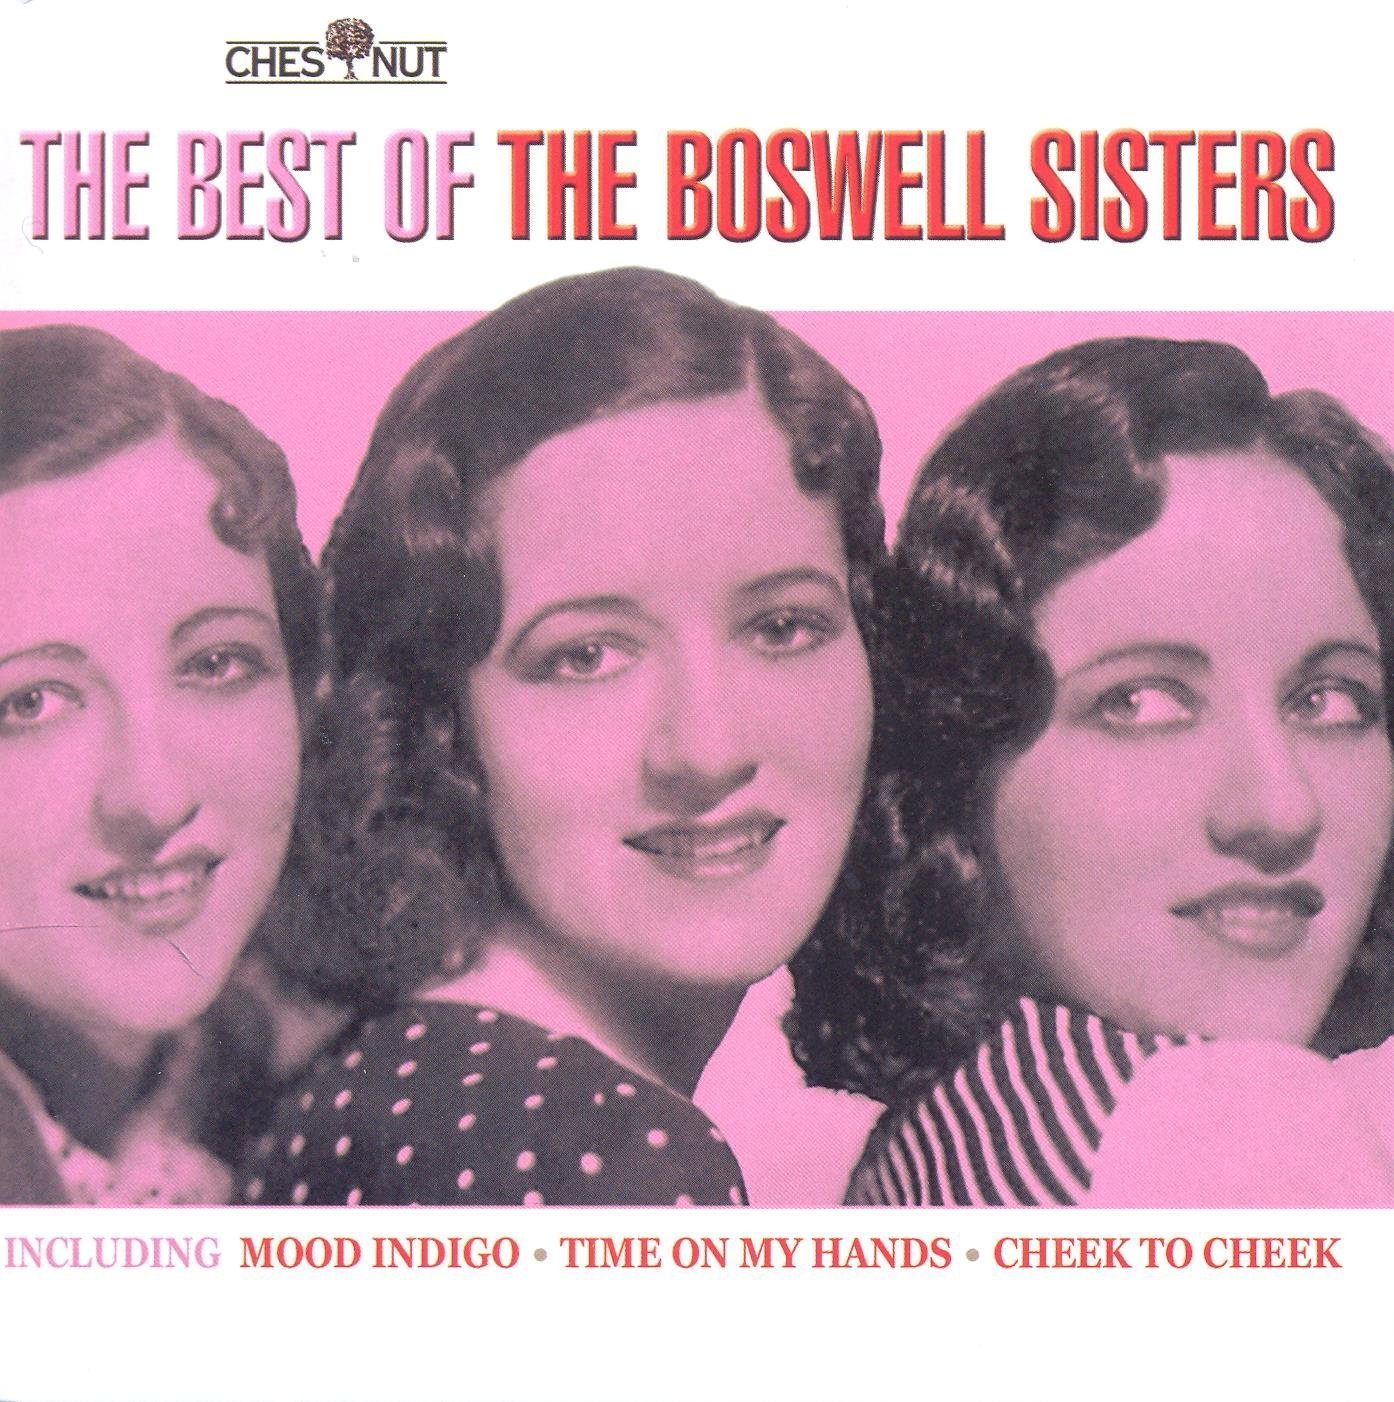 Sisters the last day. Сёстры Босвелл. "The best of the Dinning sisters альбомы. Sister last. The Boswell sisters - Louisiana Waddle.